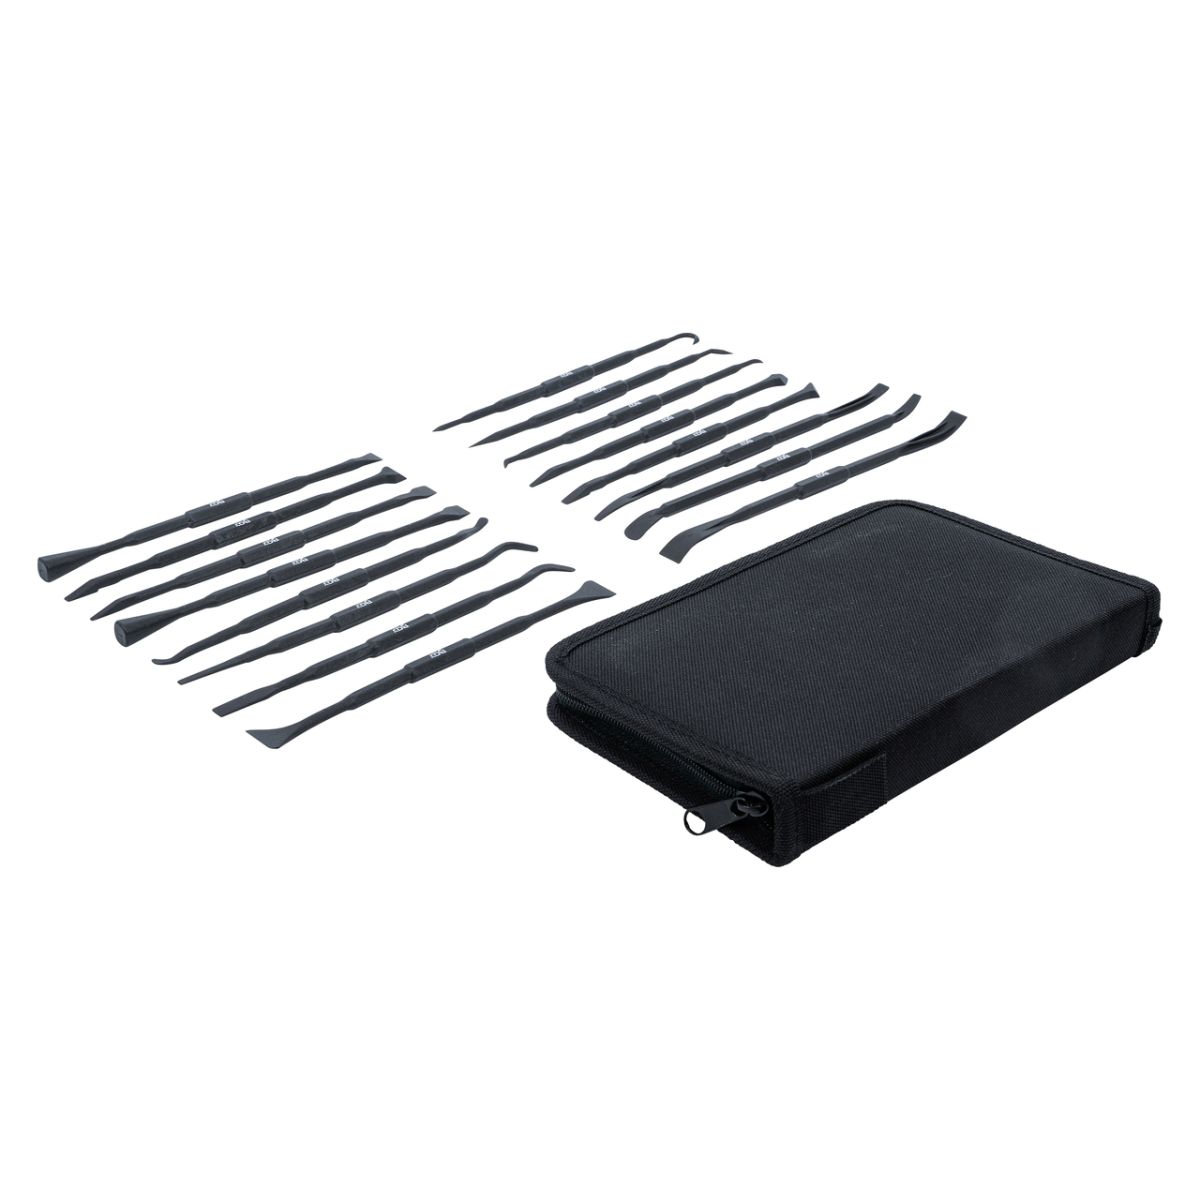 Plastic Scraper and O-Ring / Seal Ring Assembly / Disassembly Tool Set | 16 pcs.